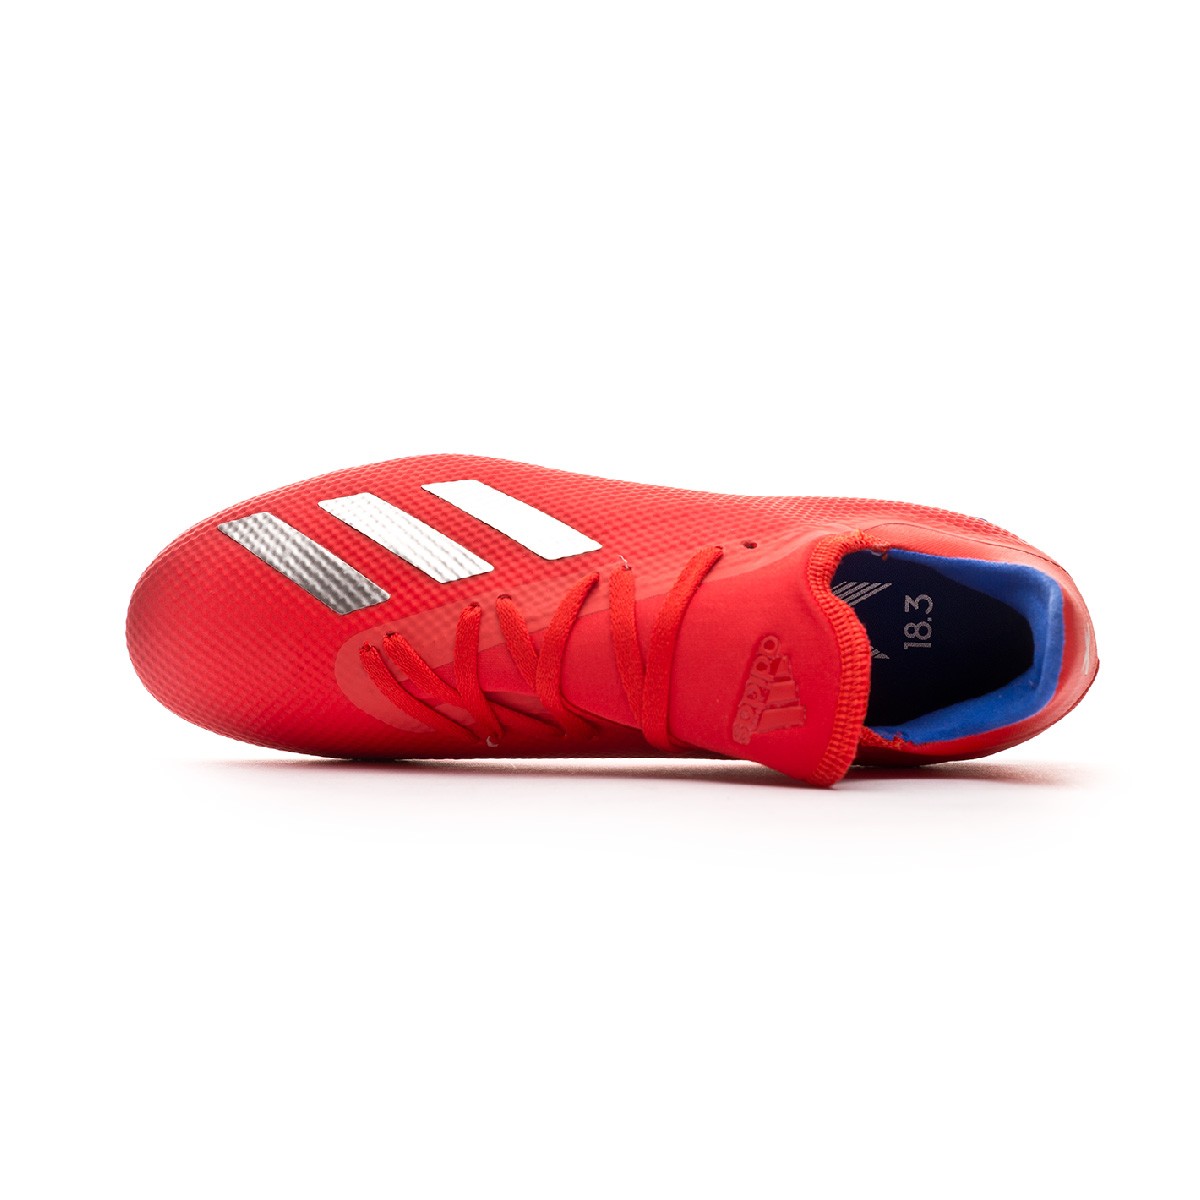 adidas x 18.3 red and blue